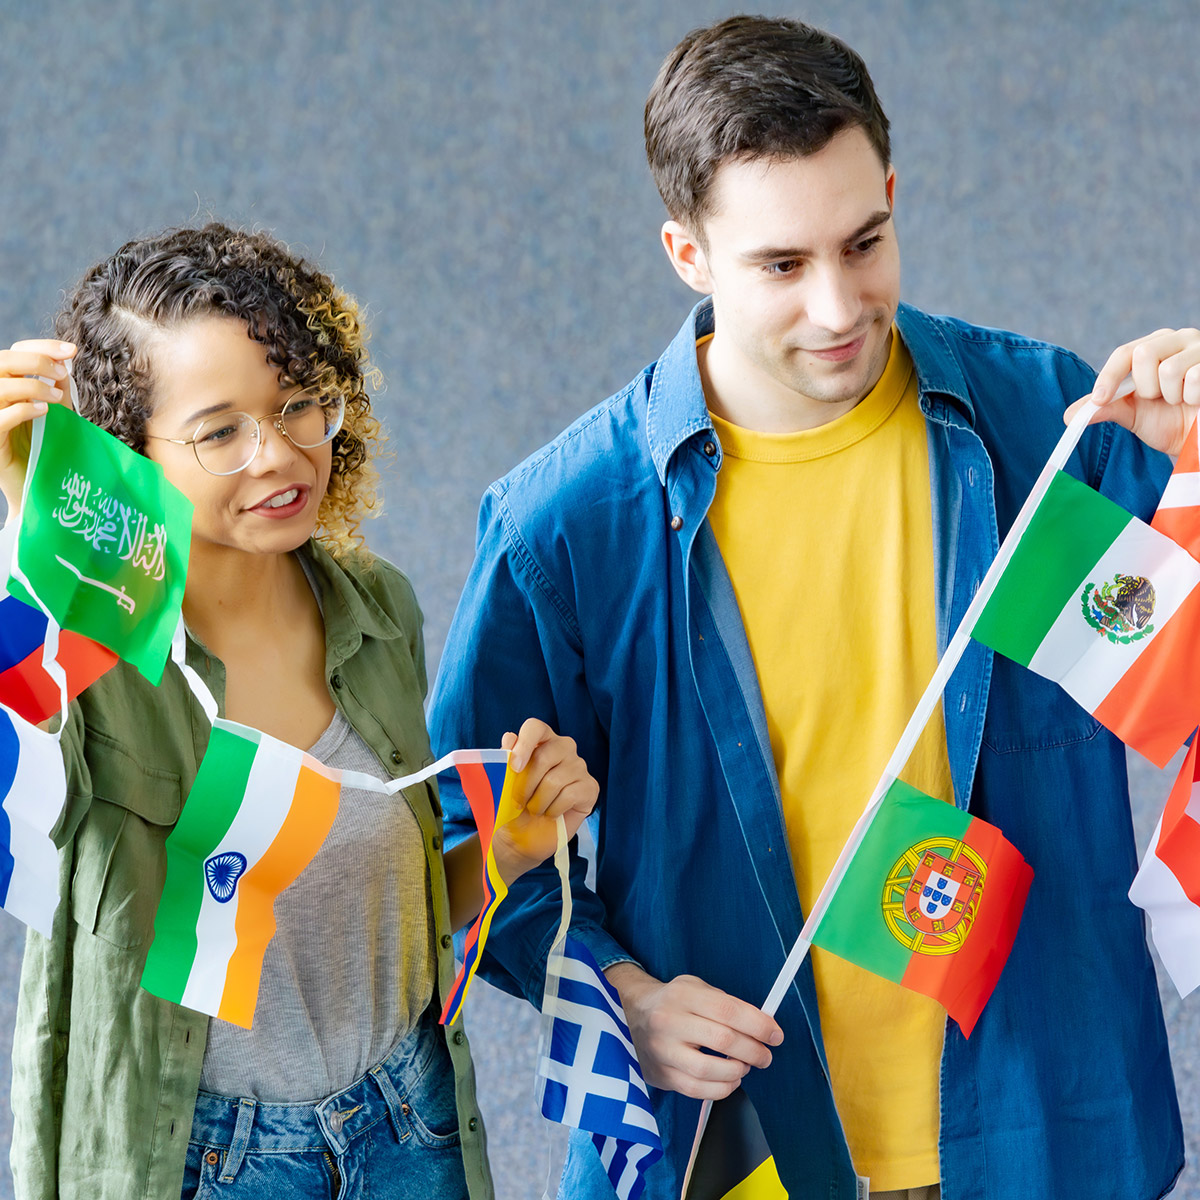 CCD Political Science students with international flags